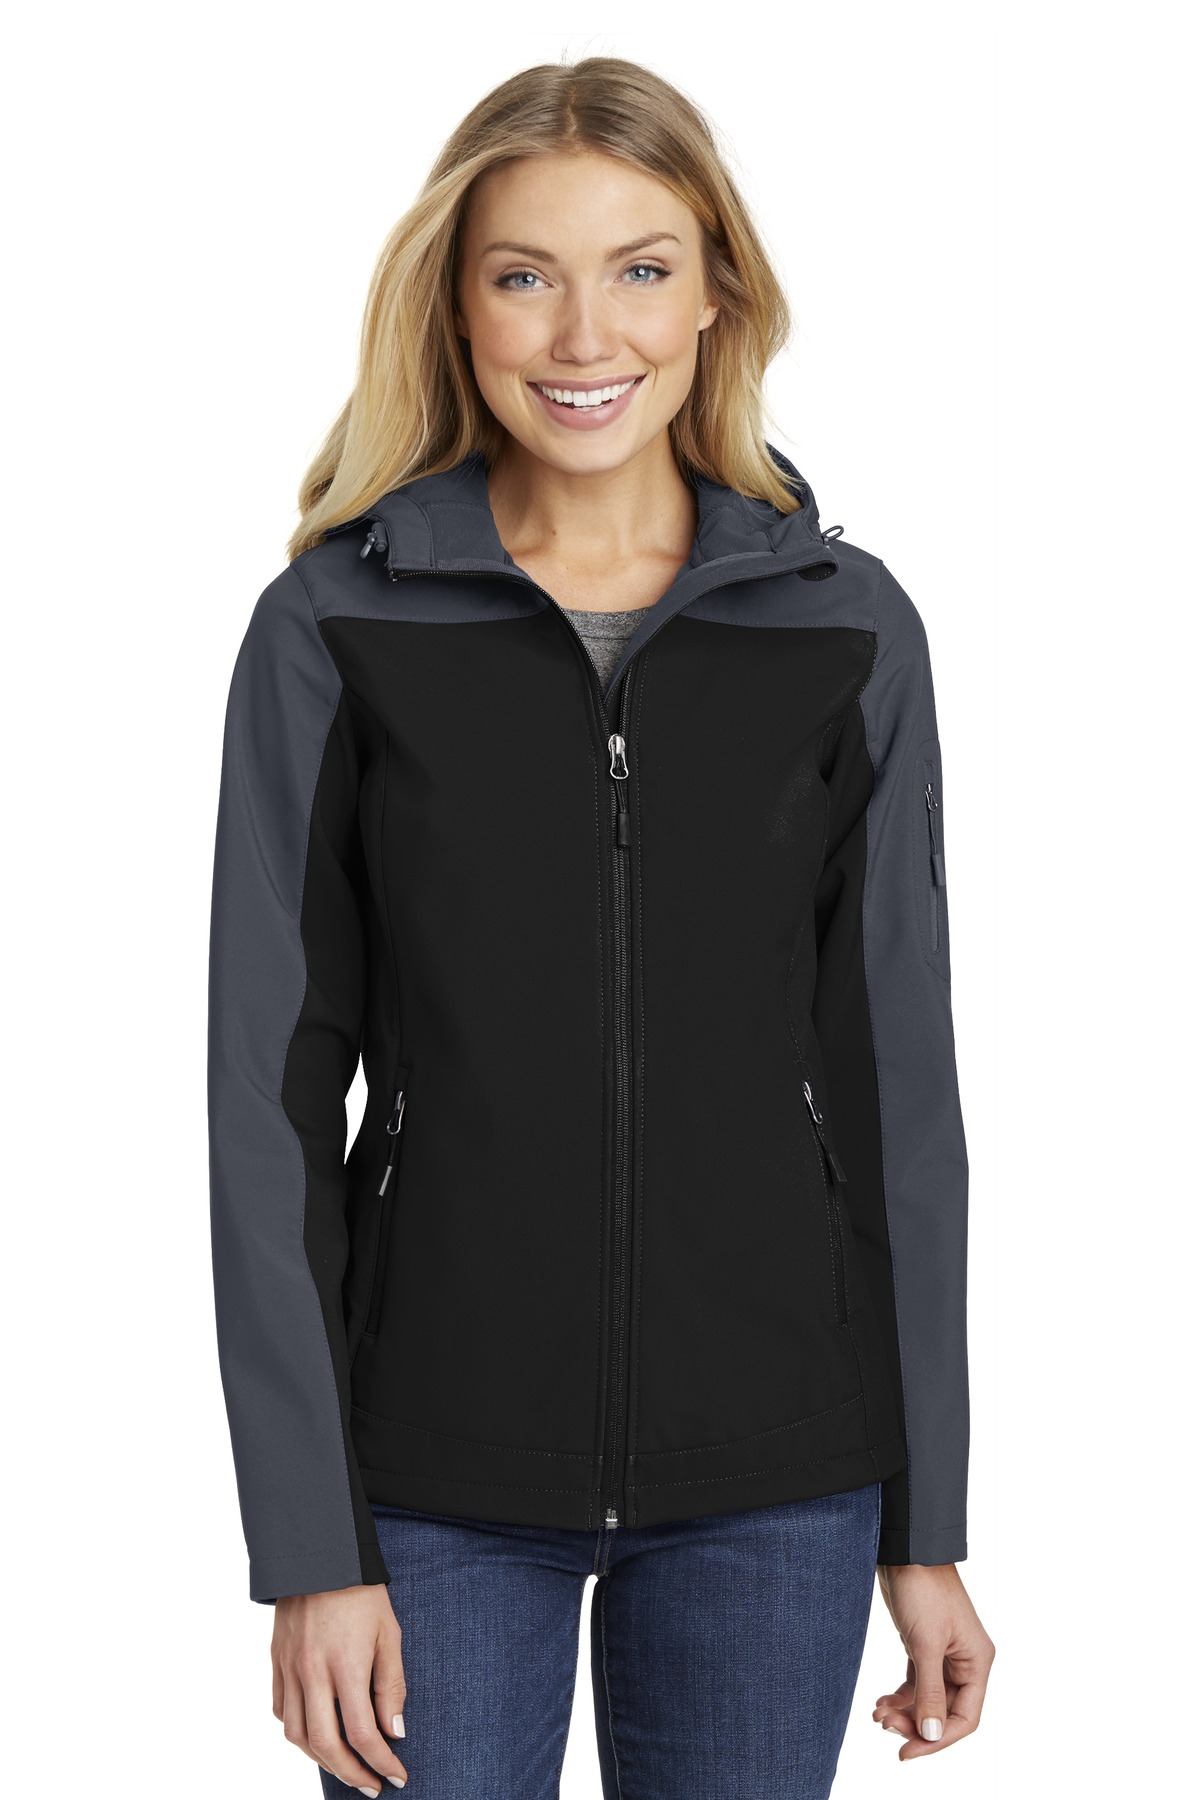 Port Authority Ladies Hooded Core Soft Shell Jacket - L335